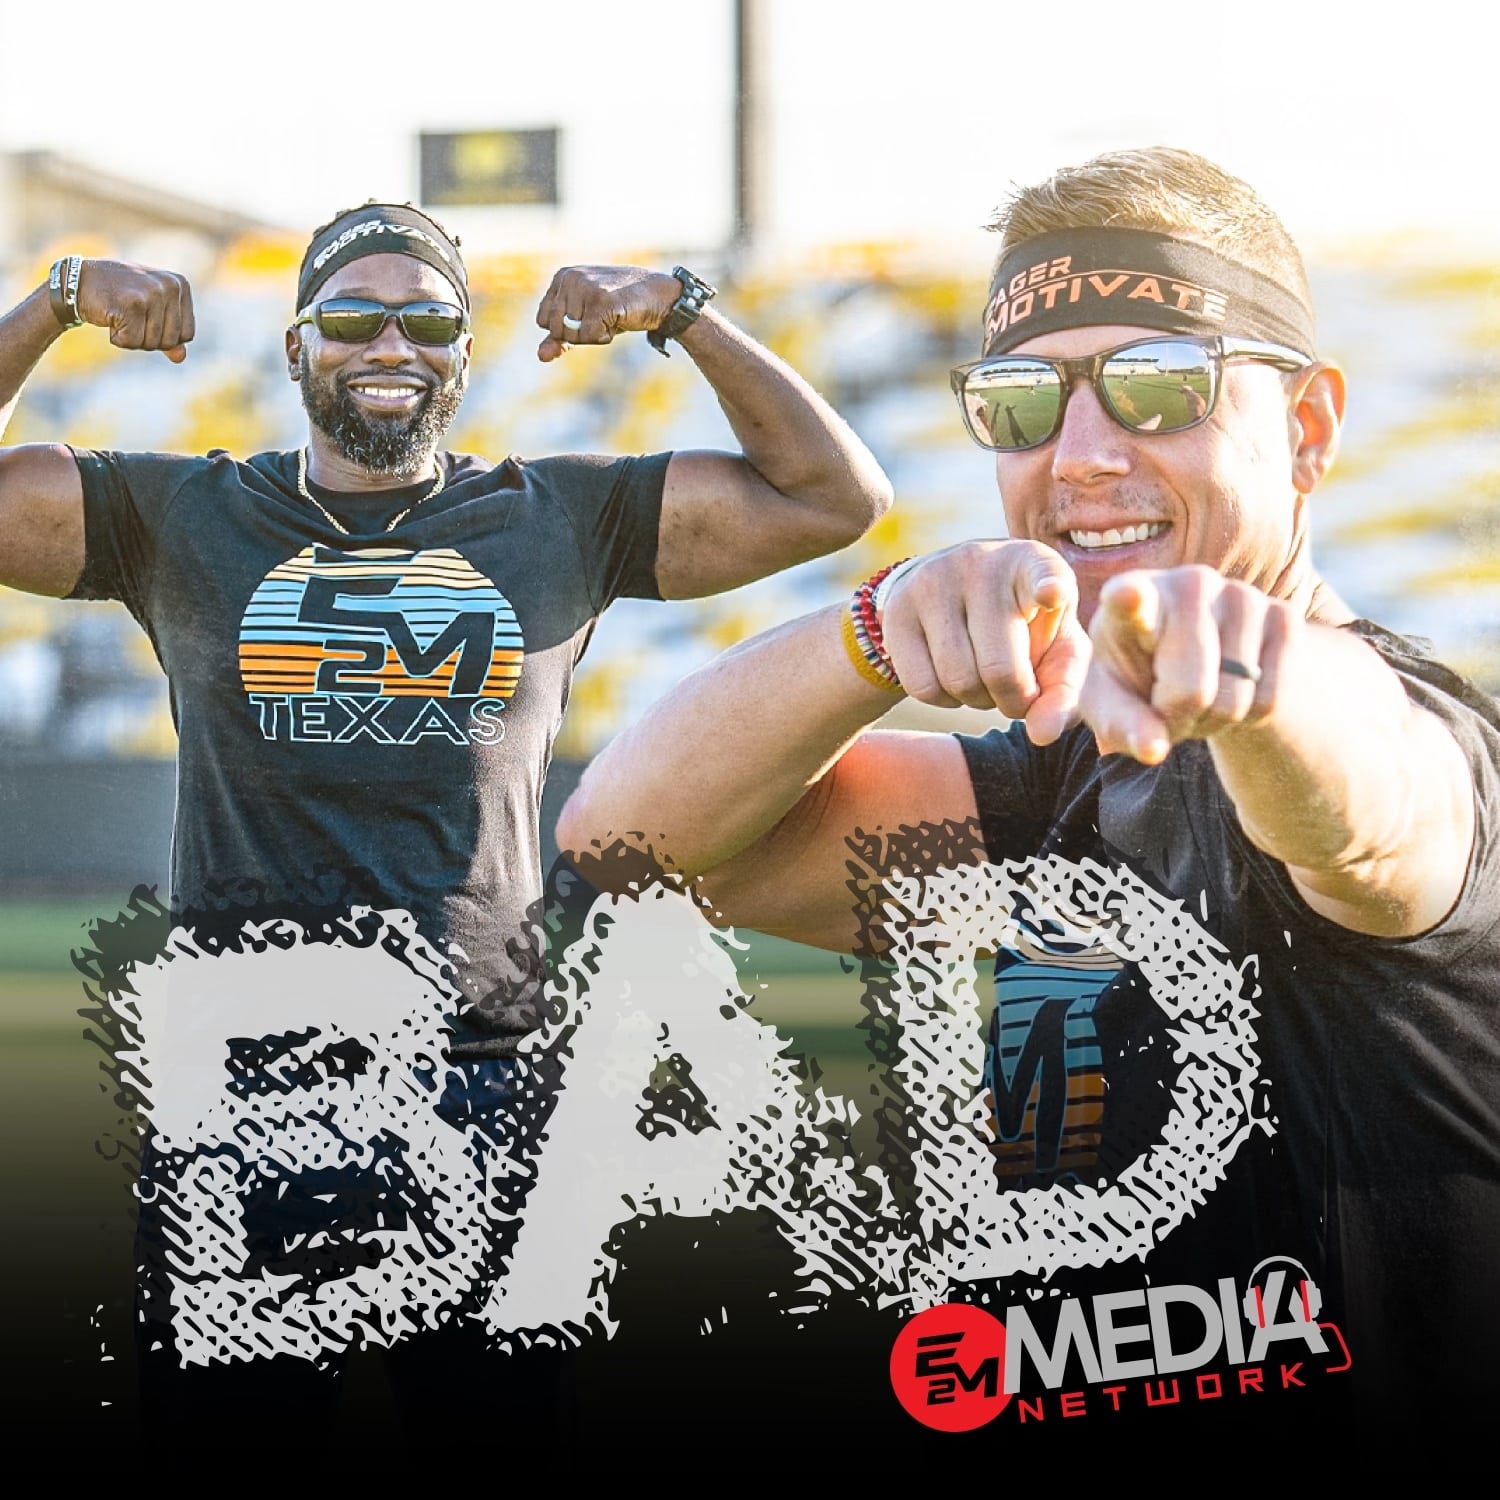 E2M Fitness Network Media – BAD Podcast – Episode 8 – Fast Track “Starve yourself Weaknesses”